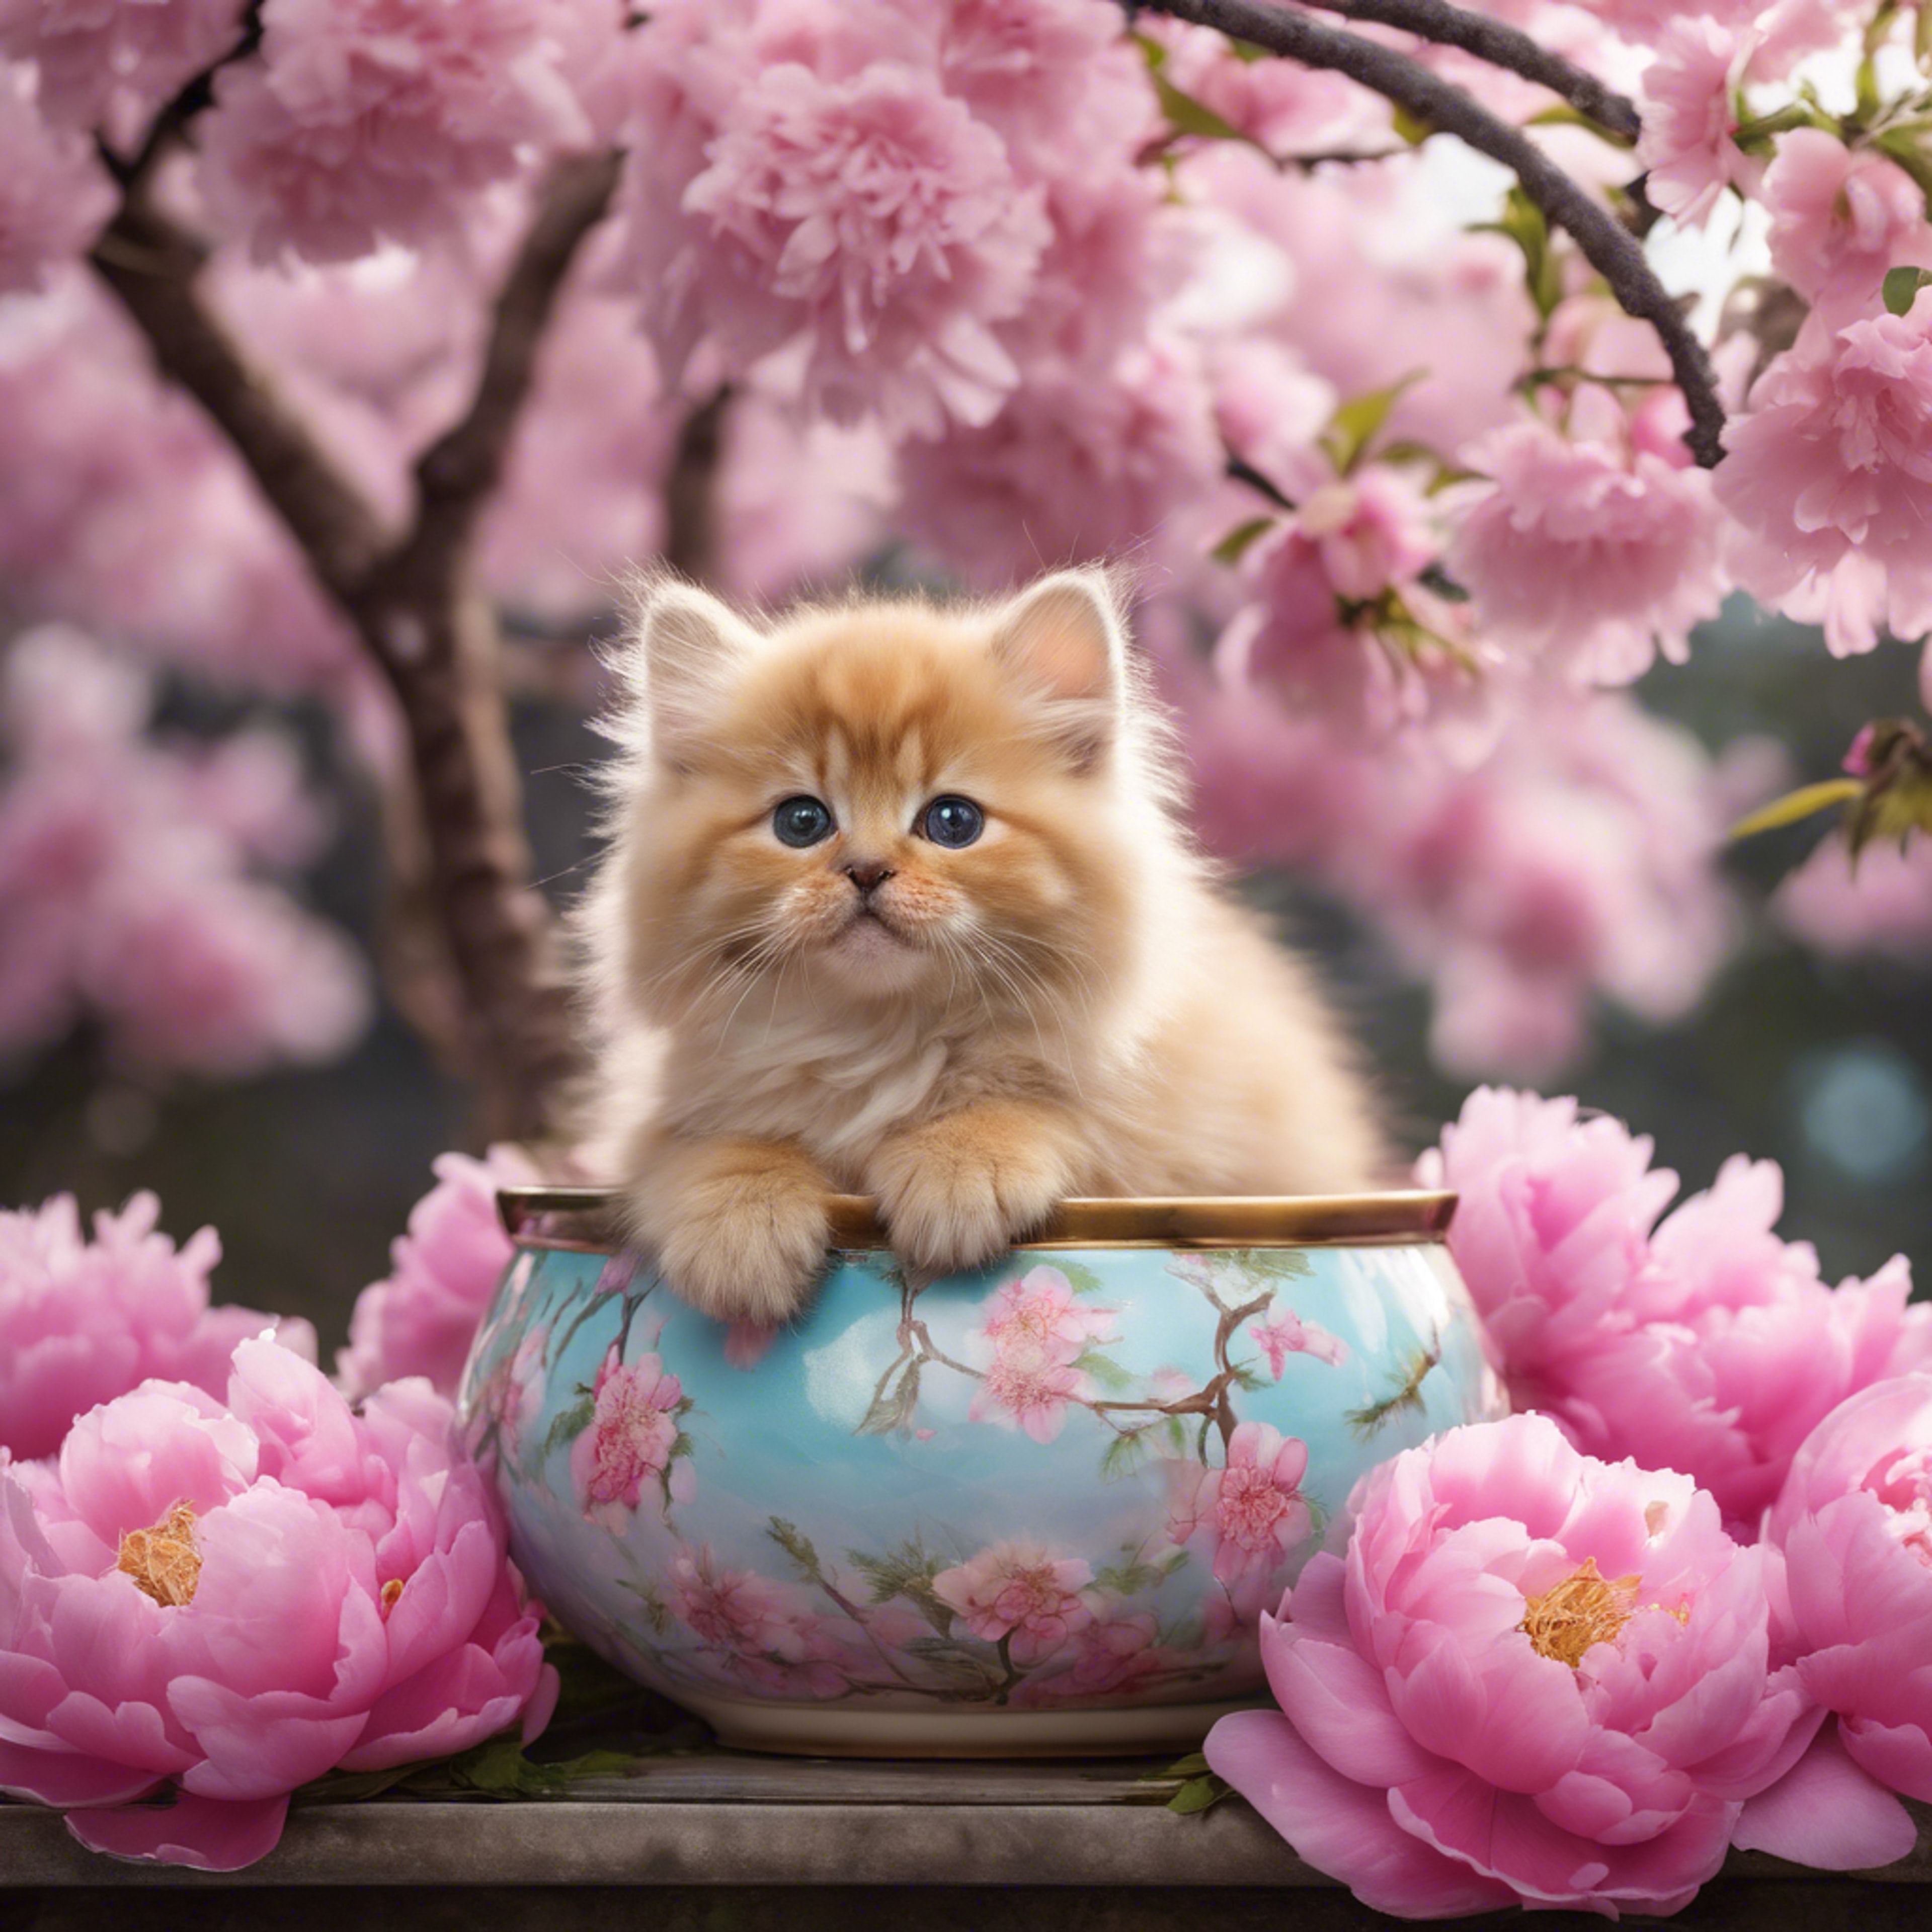 A golden Chinchilla kitten sitting in a porcelain pot full of vibrant peonies, basking under a cherry blossom tree in the height of spring.壁紙[dd9b8f90e8304d65accd]